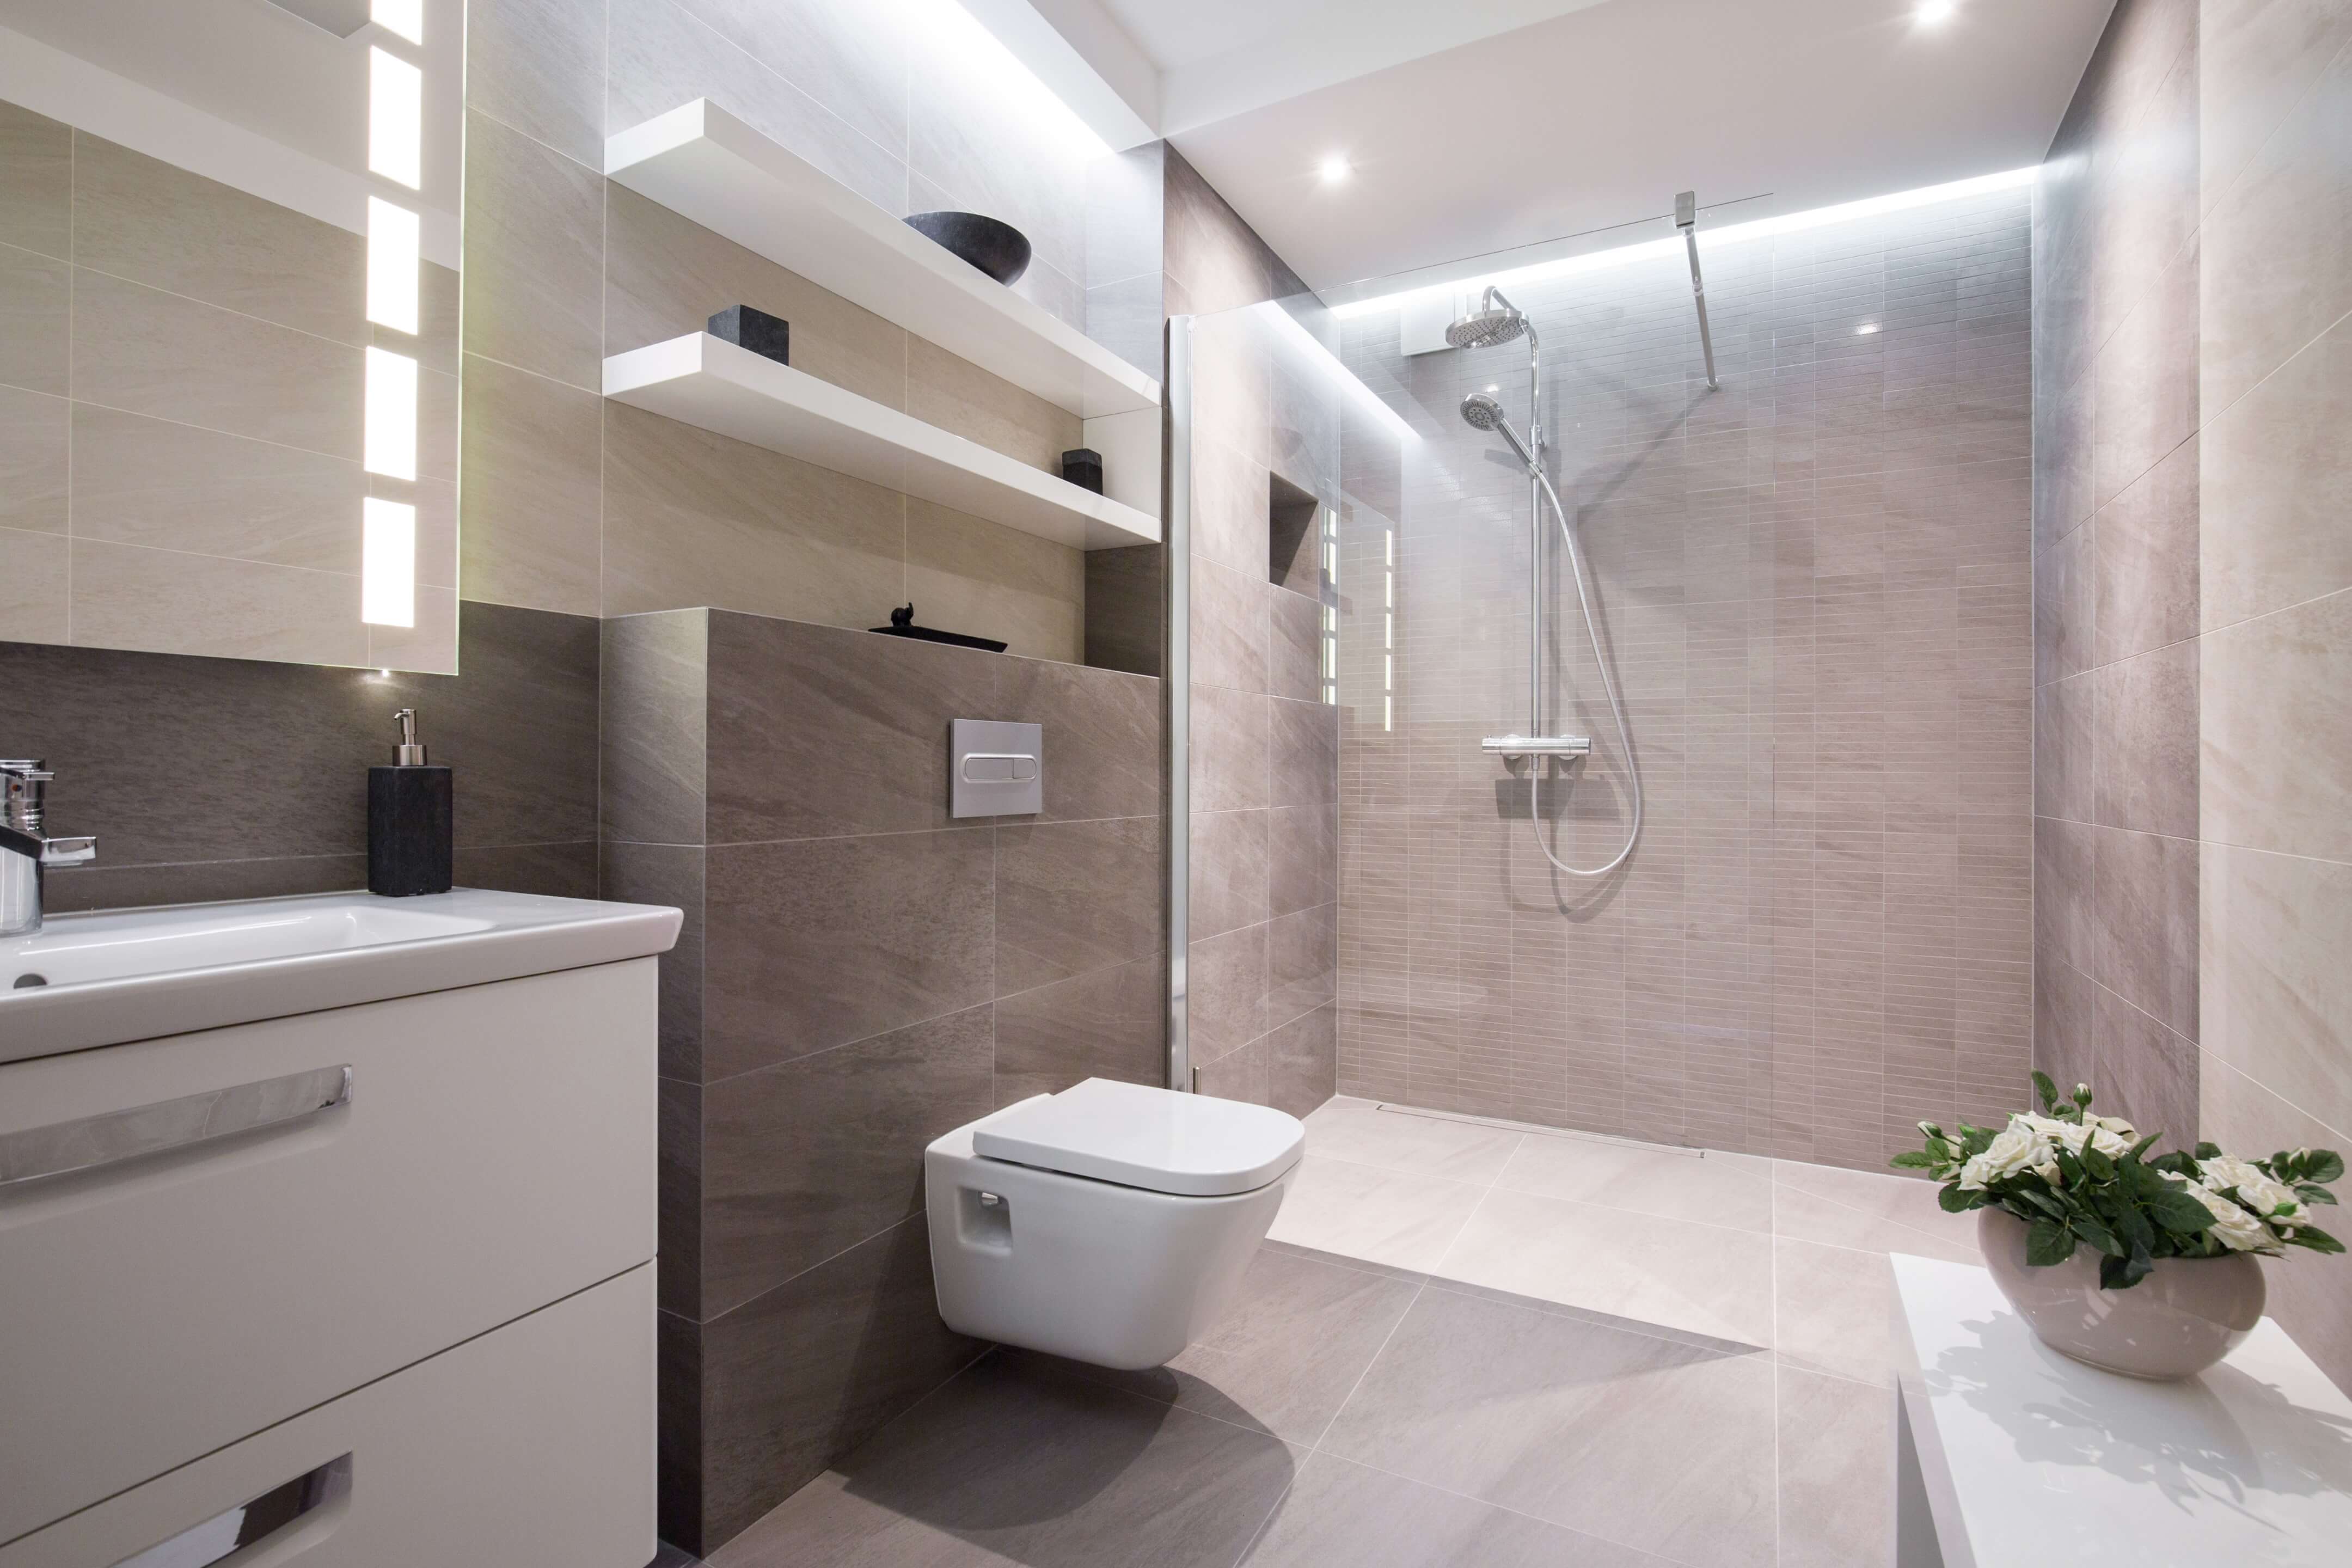 local bathroom fitters hammersmith